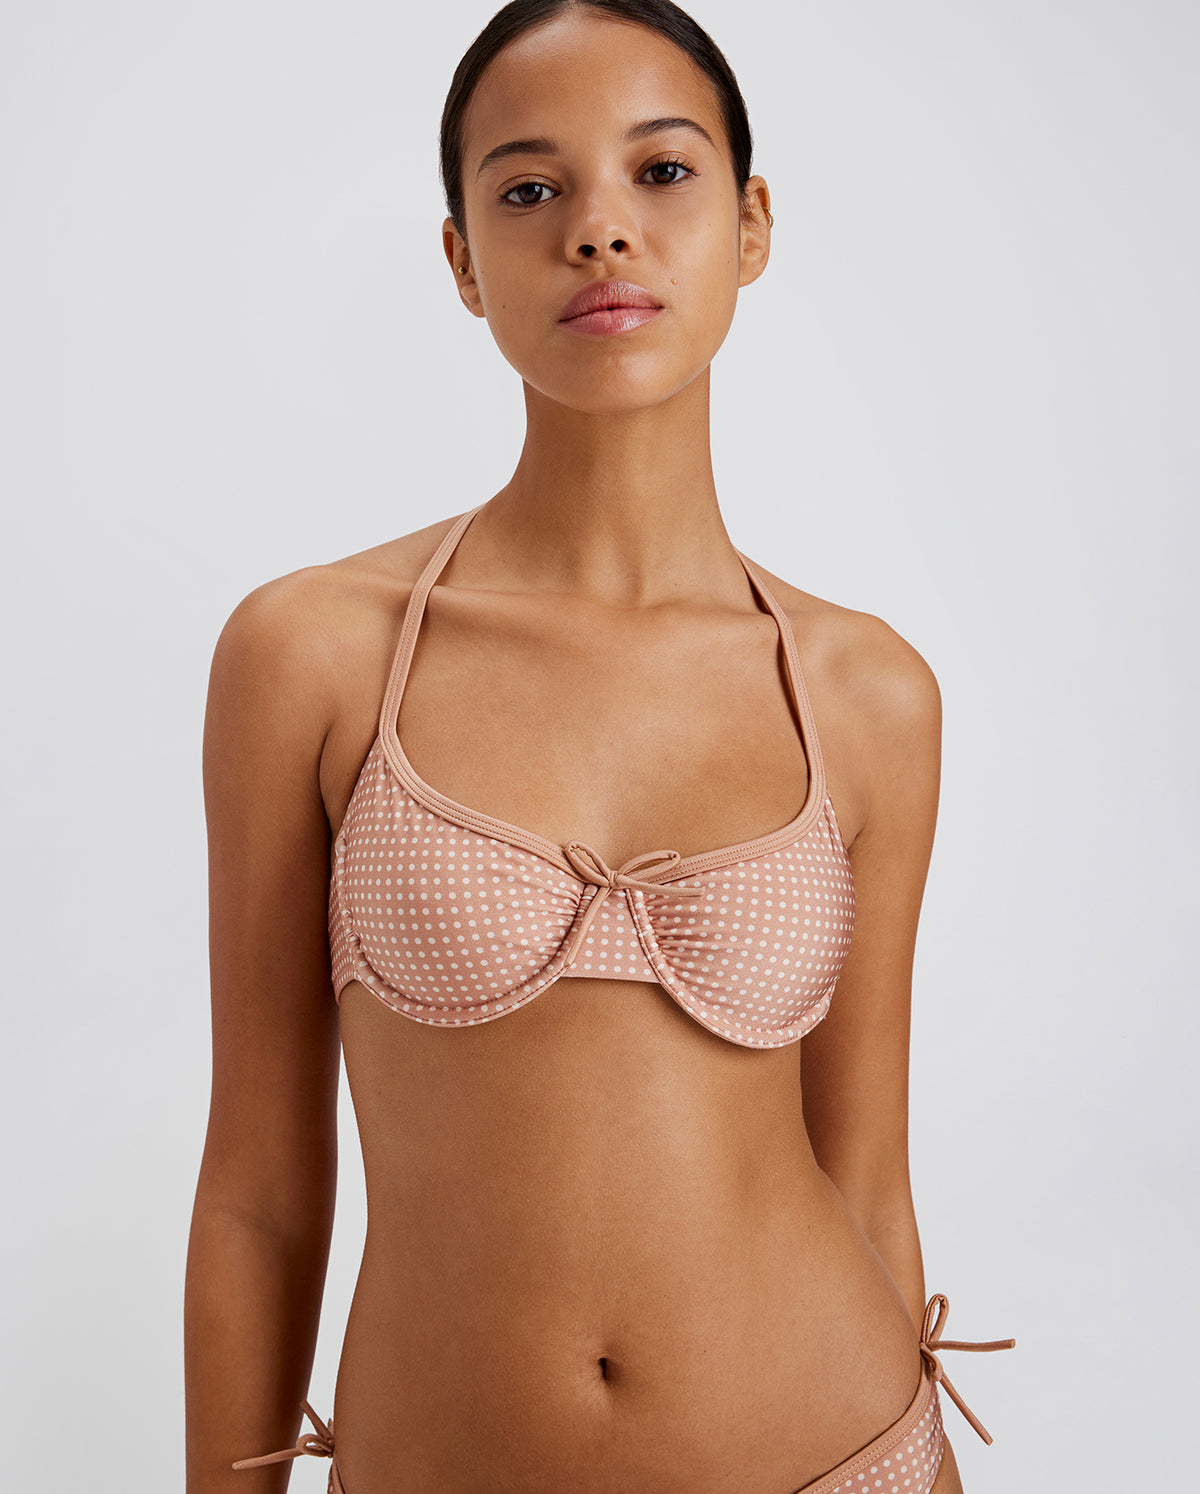 The Sydney Top - Taupe Polka Dot